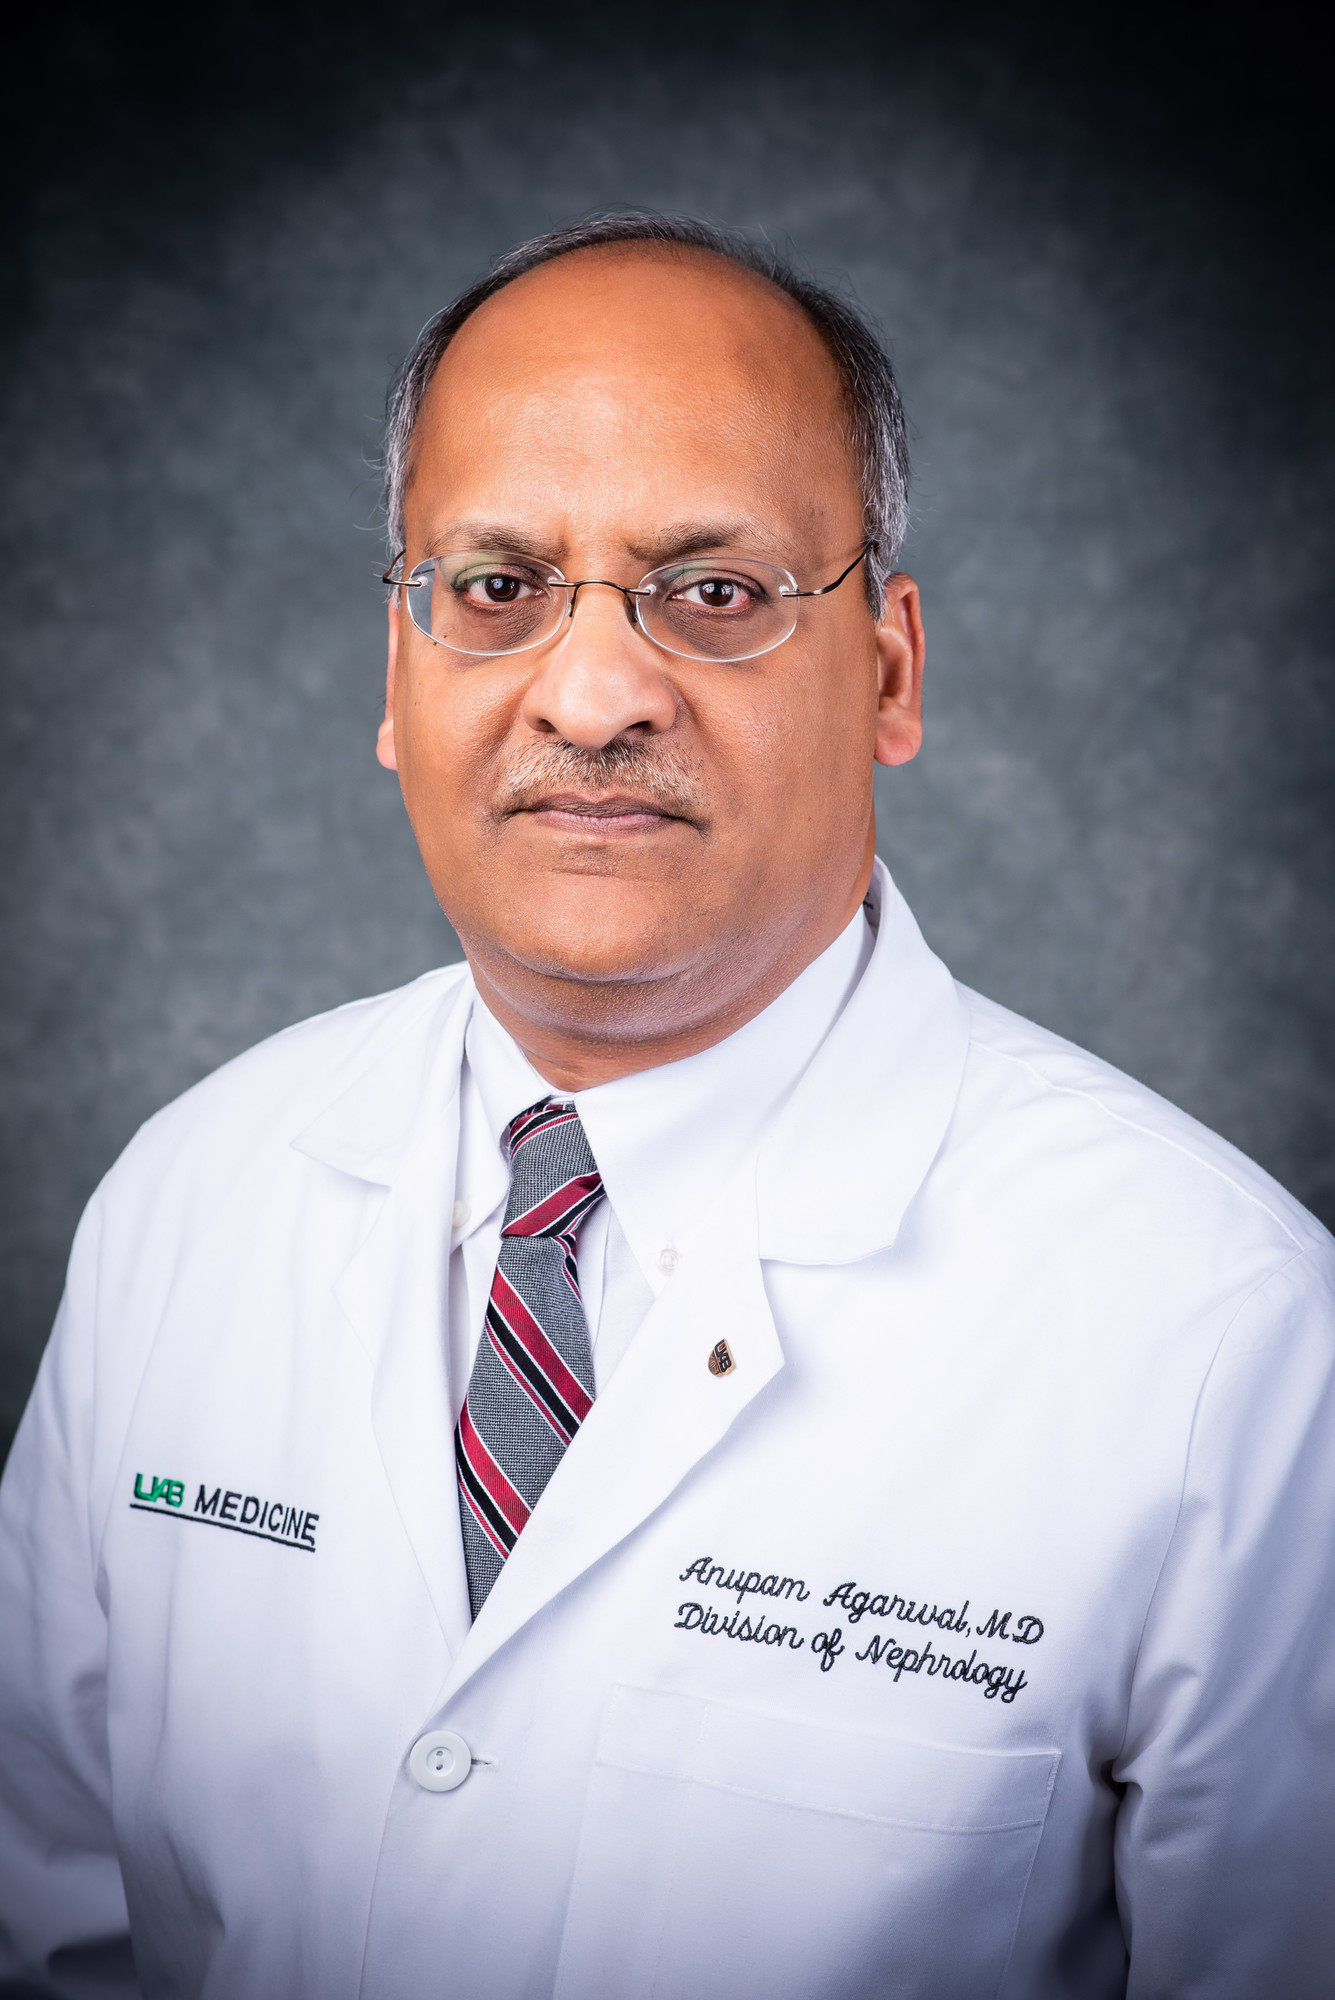 Head shot of Dr. Anupam Agarwal, MD (Professor and Director, Nephrology) in white medical coat, 2018.